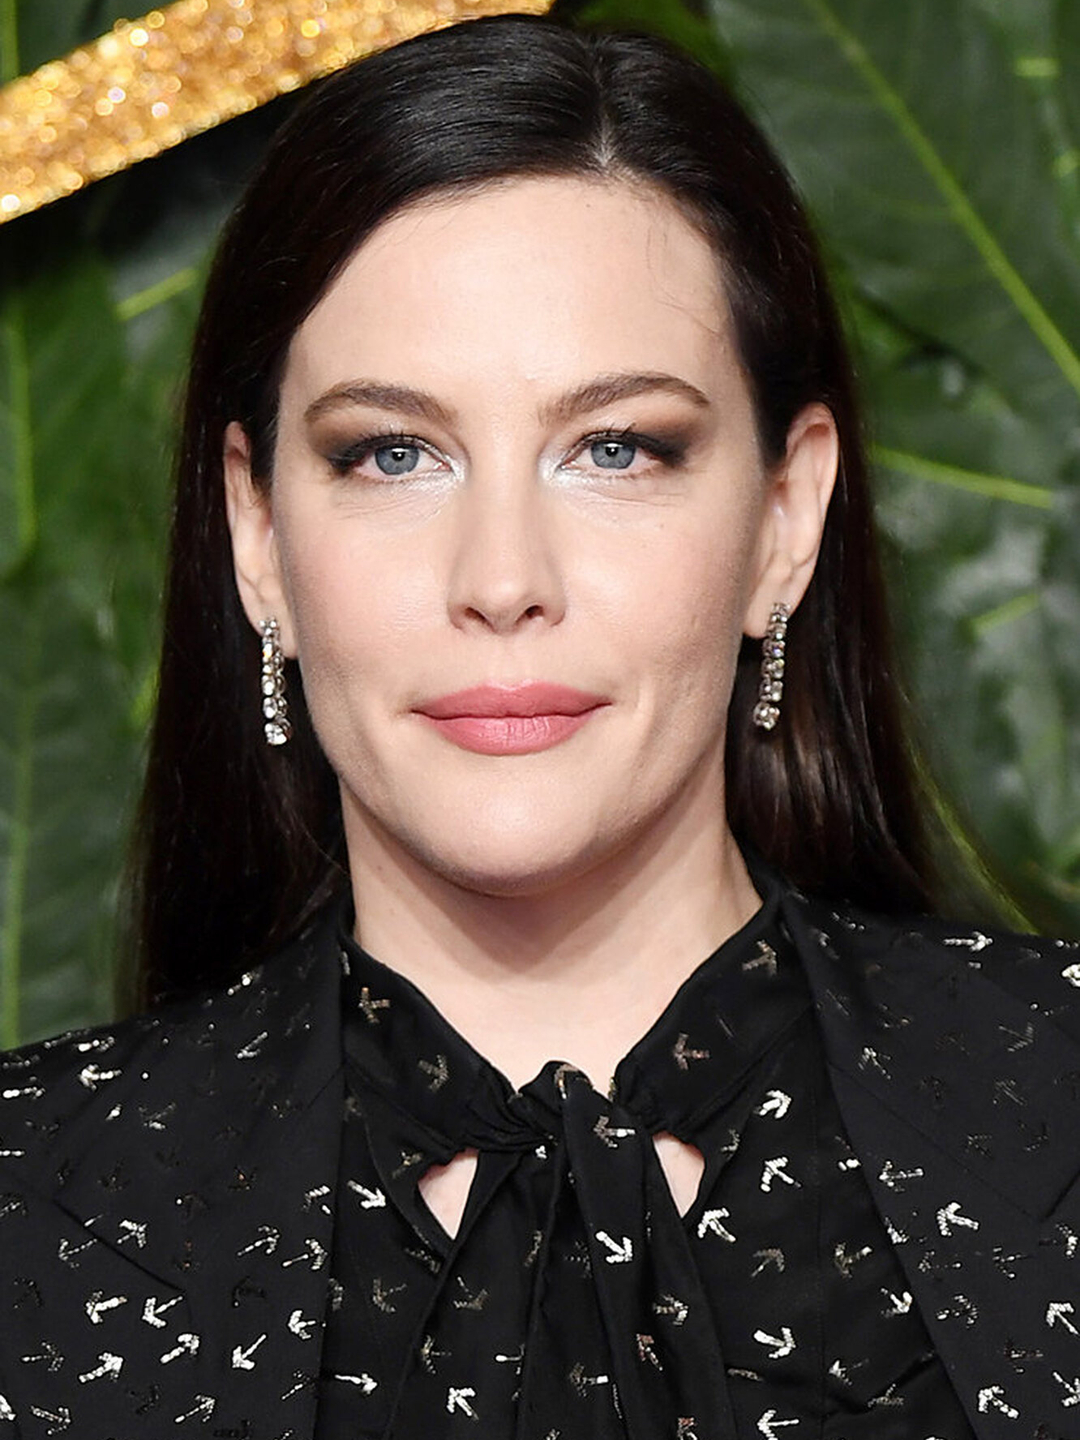 Liv Tyler does she have a husband